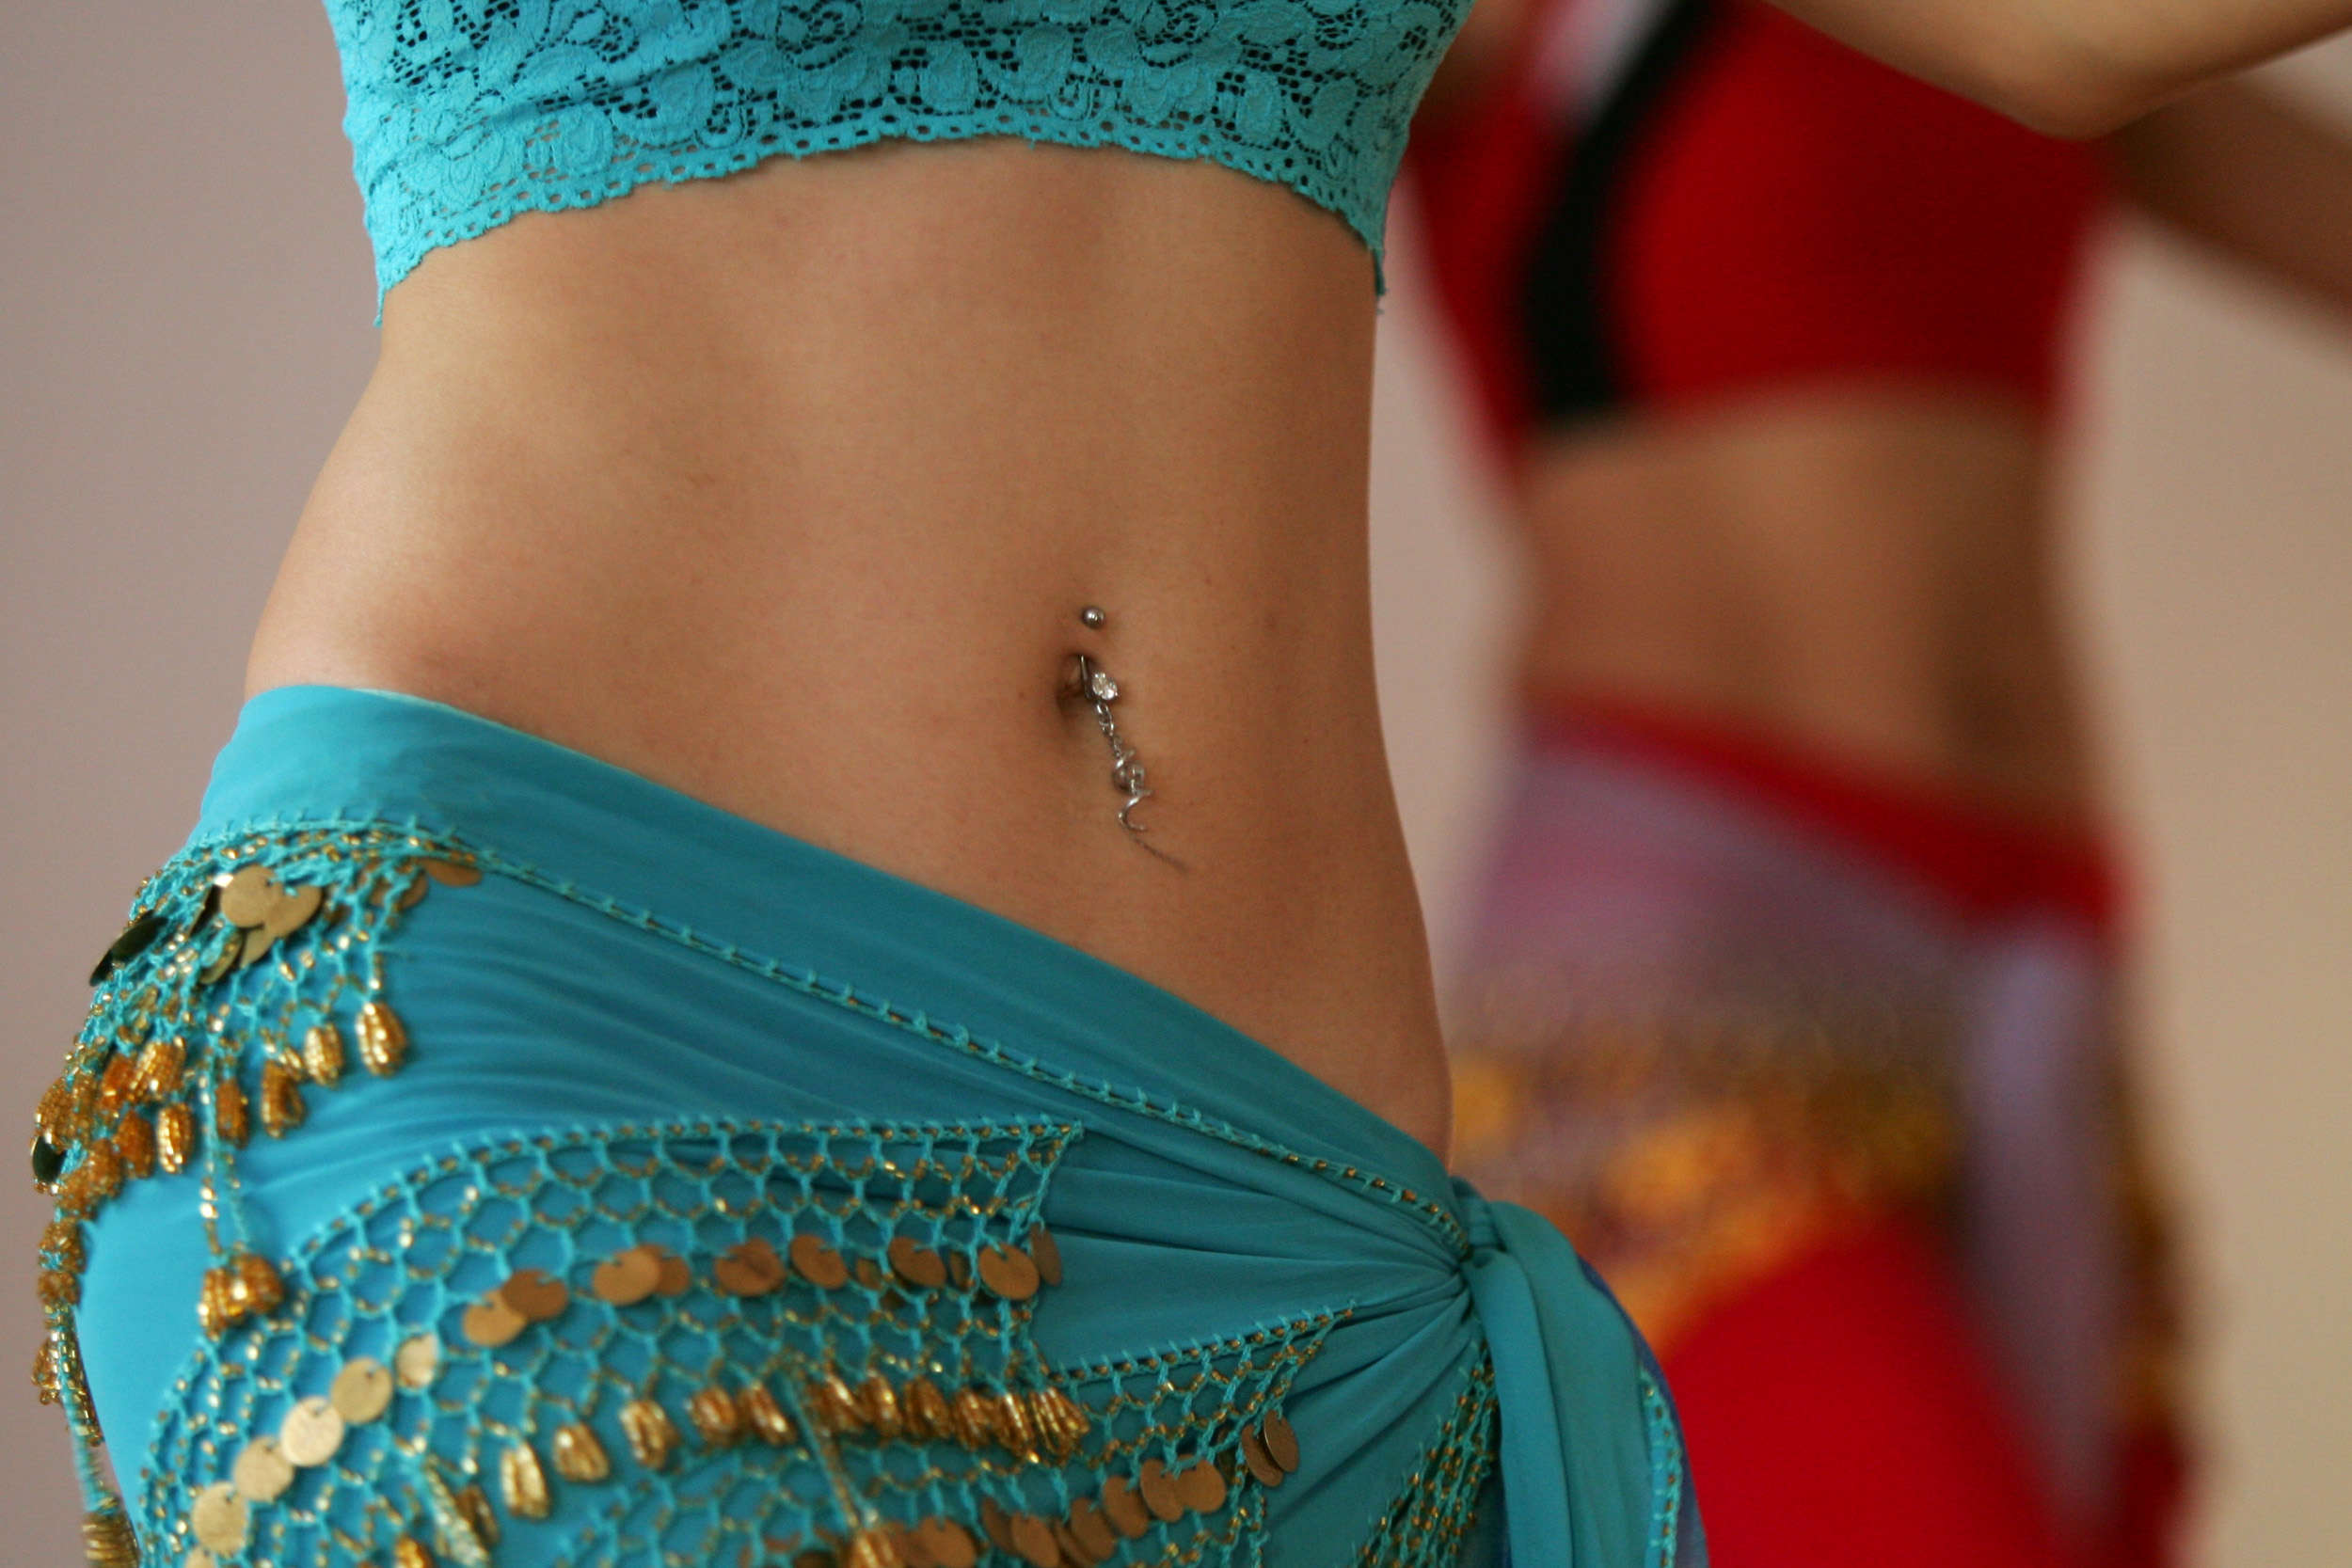 Barbie belly dancers best adult free pictures